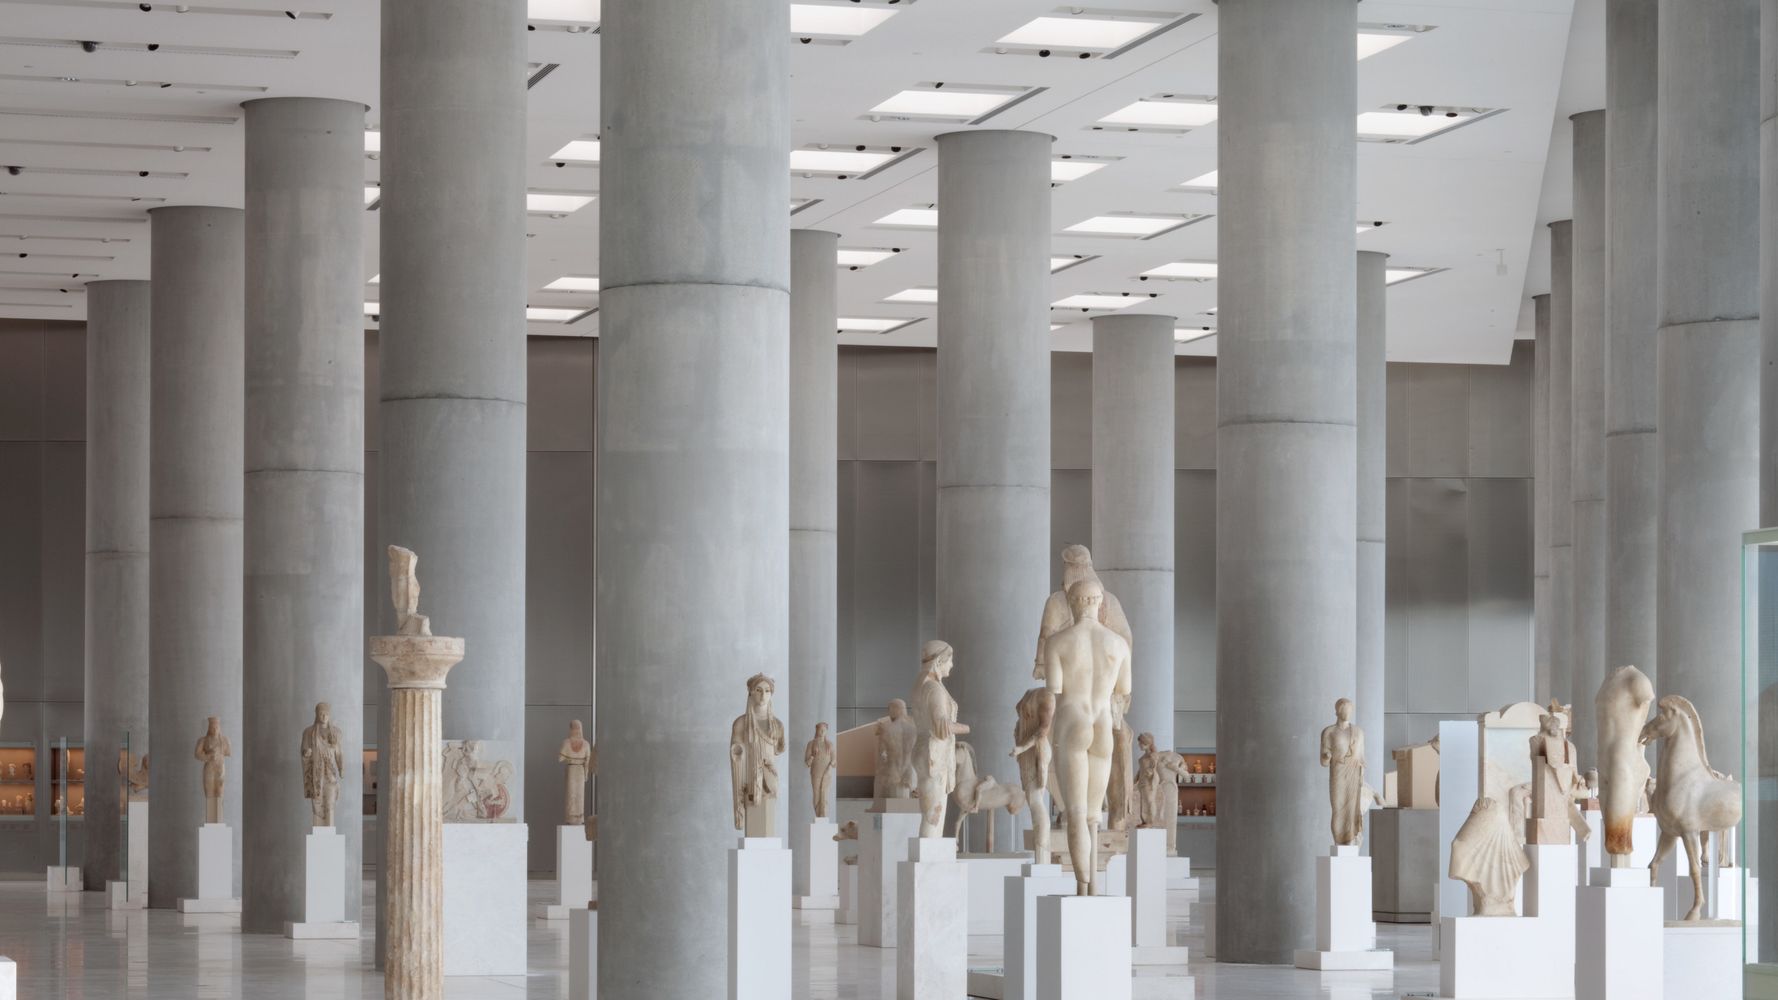 Acropolis Museum: Free entry for European Night and International Museum Day